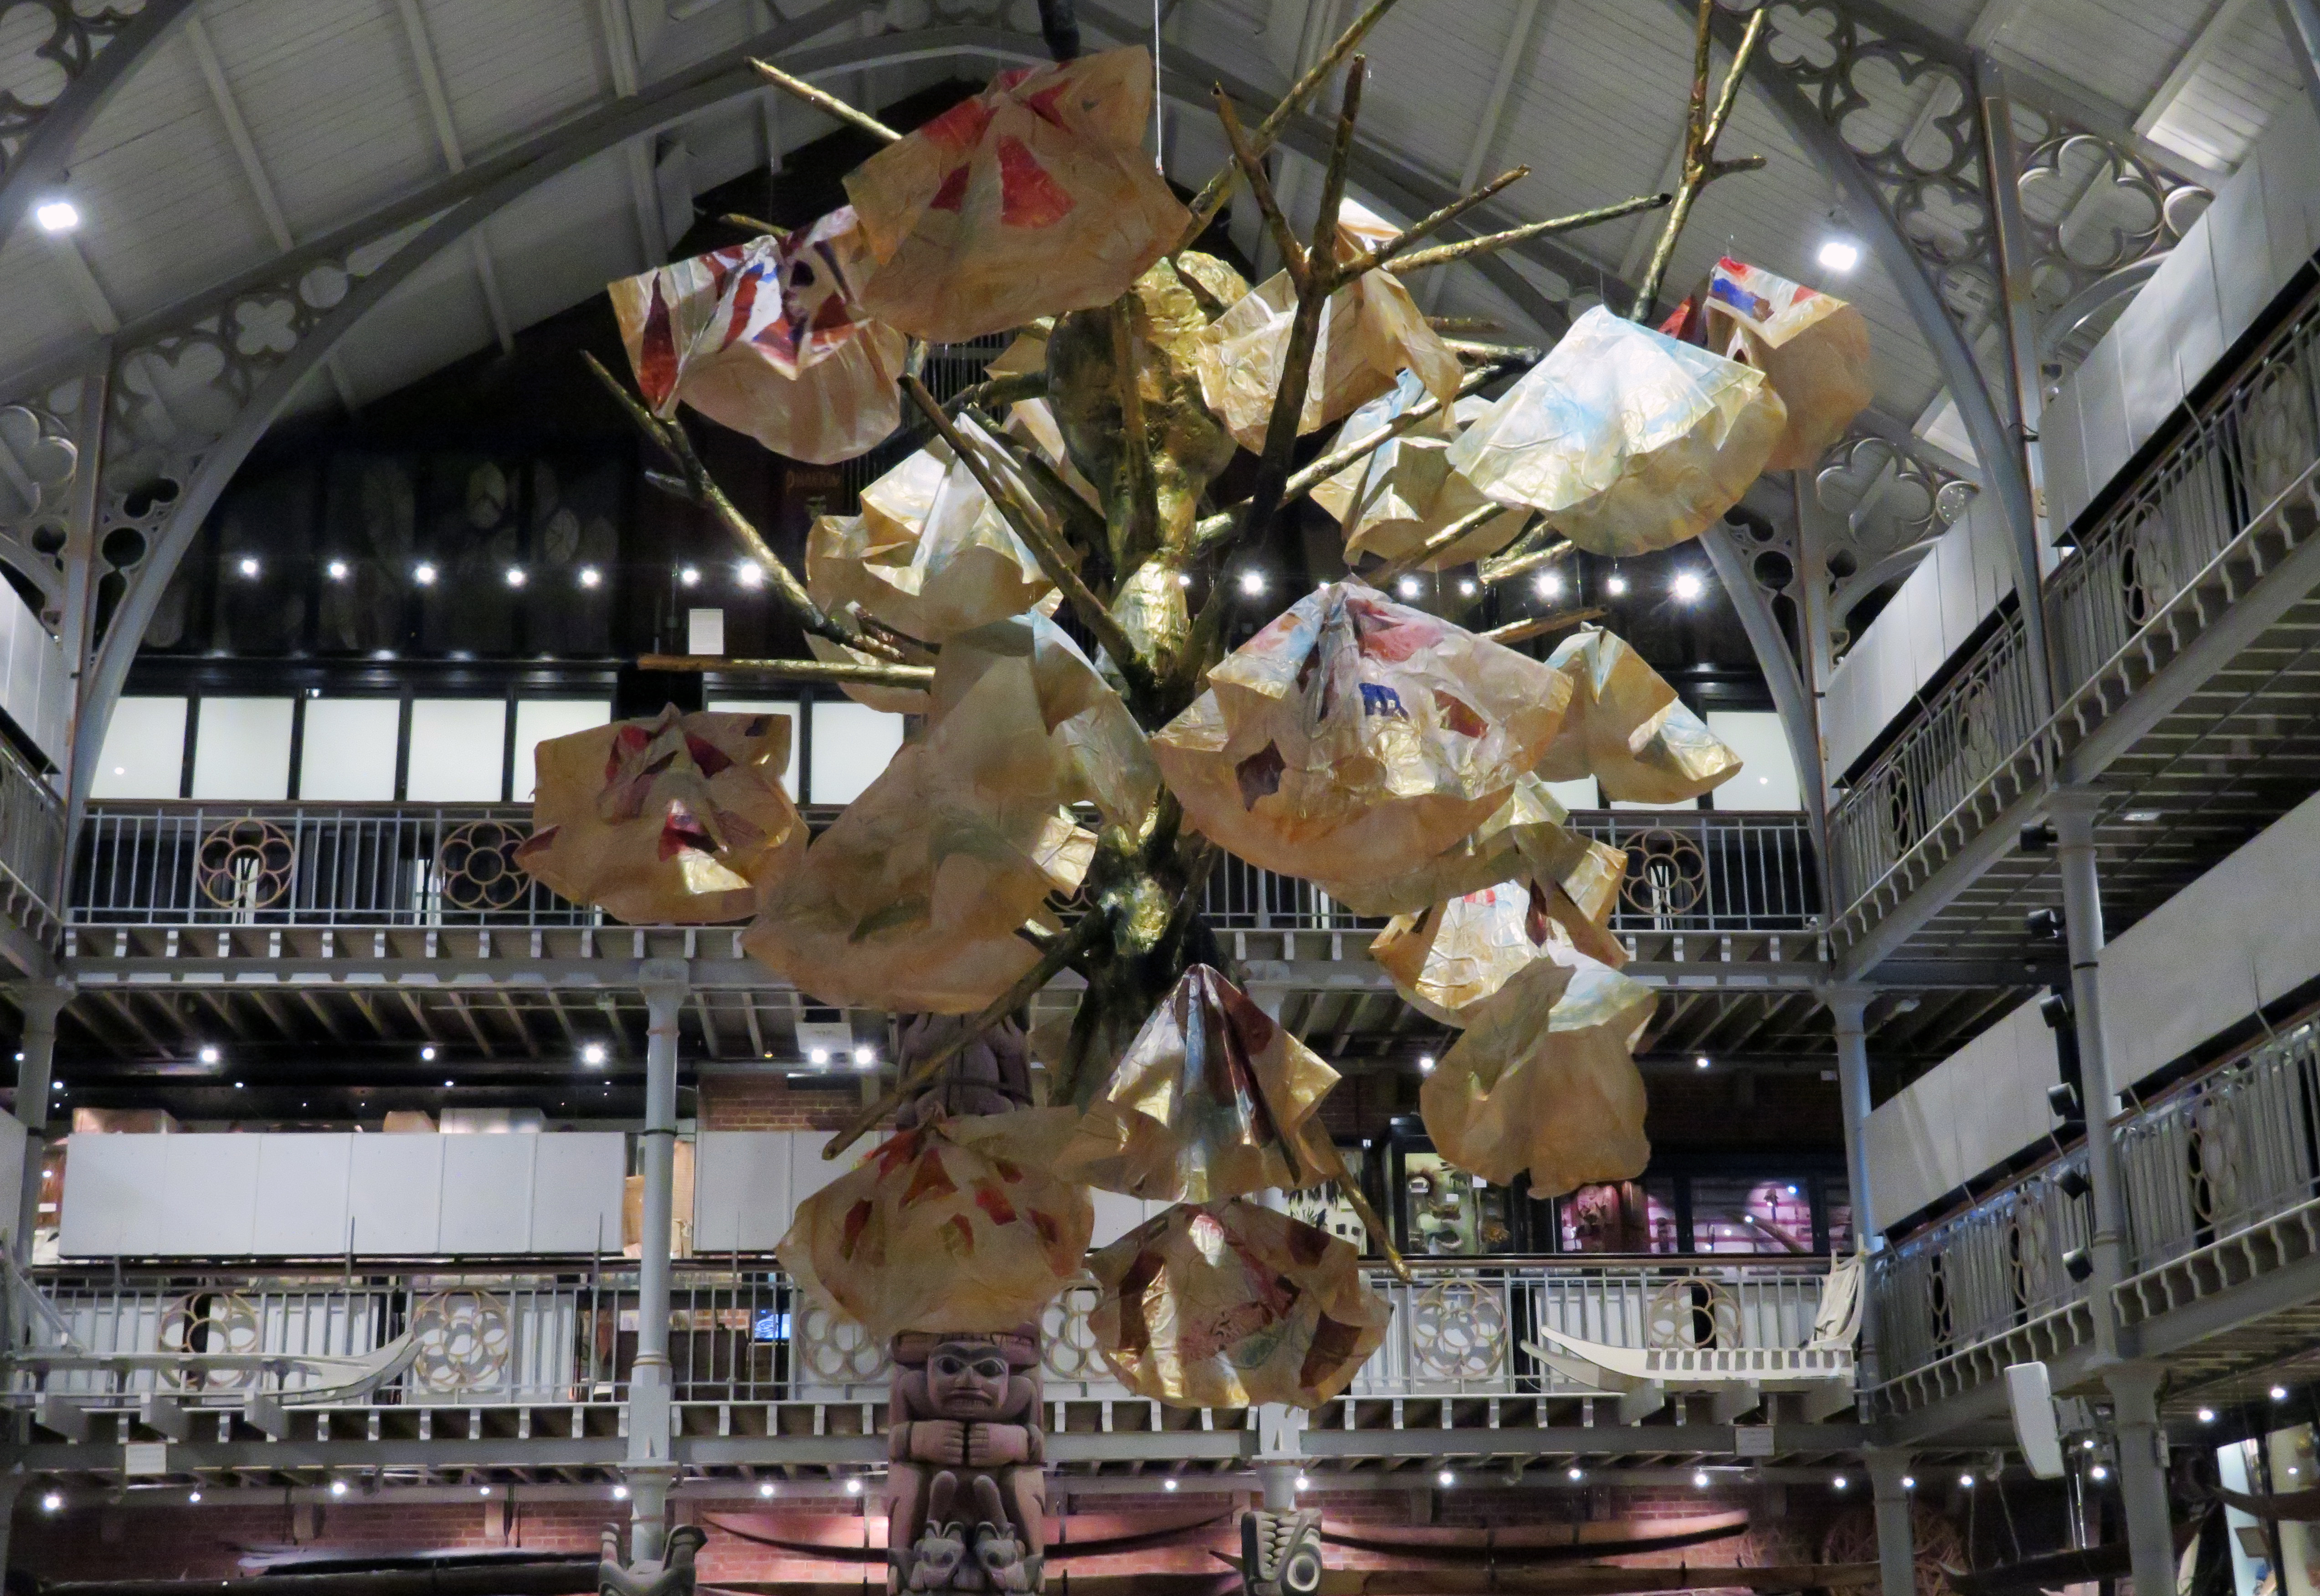 Close up view of a branching paper sculpture in front of a backdrop showing the roof and railings of gallery floors of a museum.